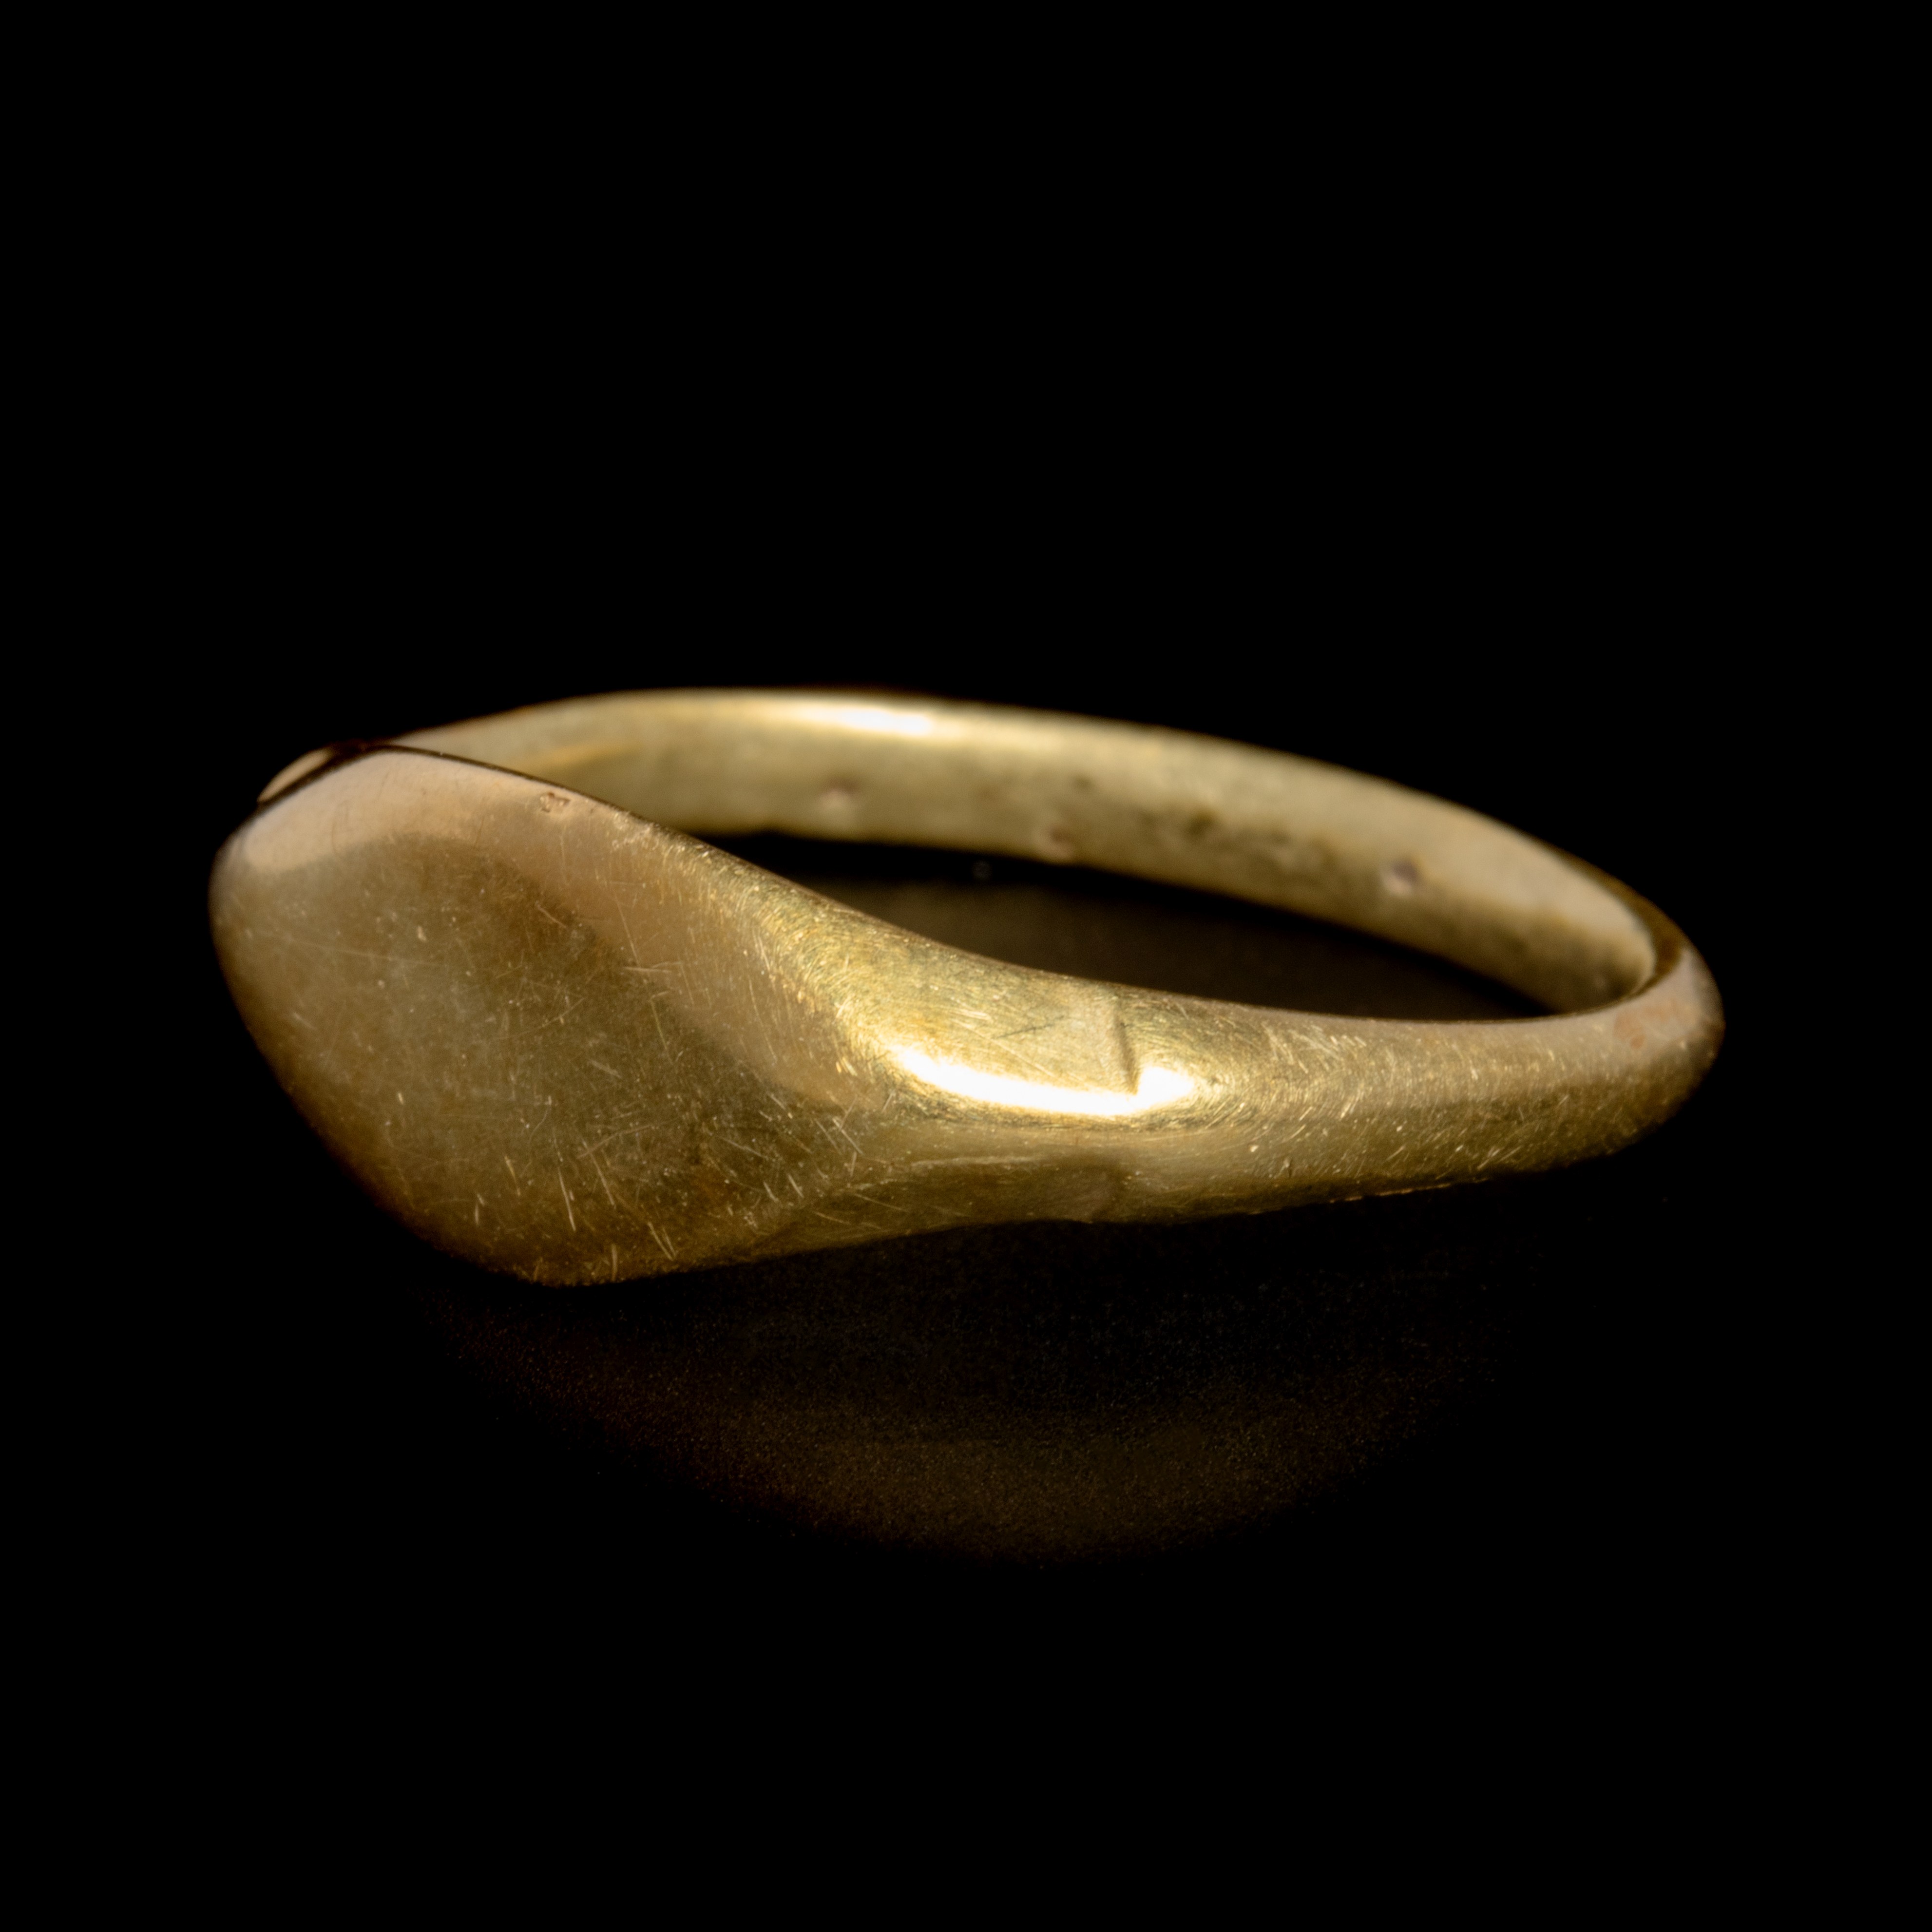 A Roman Gold Finger Ring Ring size 7 3/4; Diameter 3/4 inch (2 cm). - Image 3 of 4